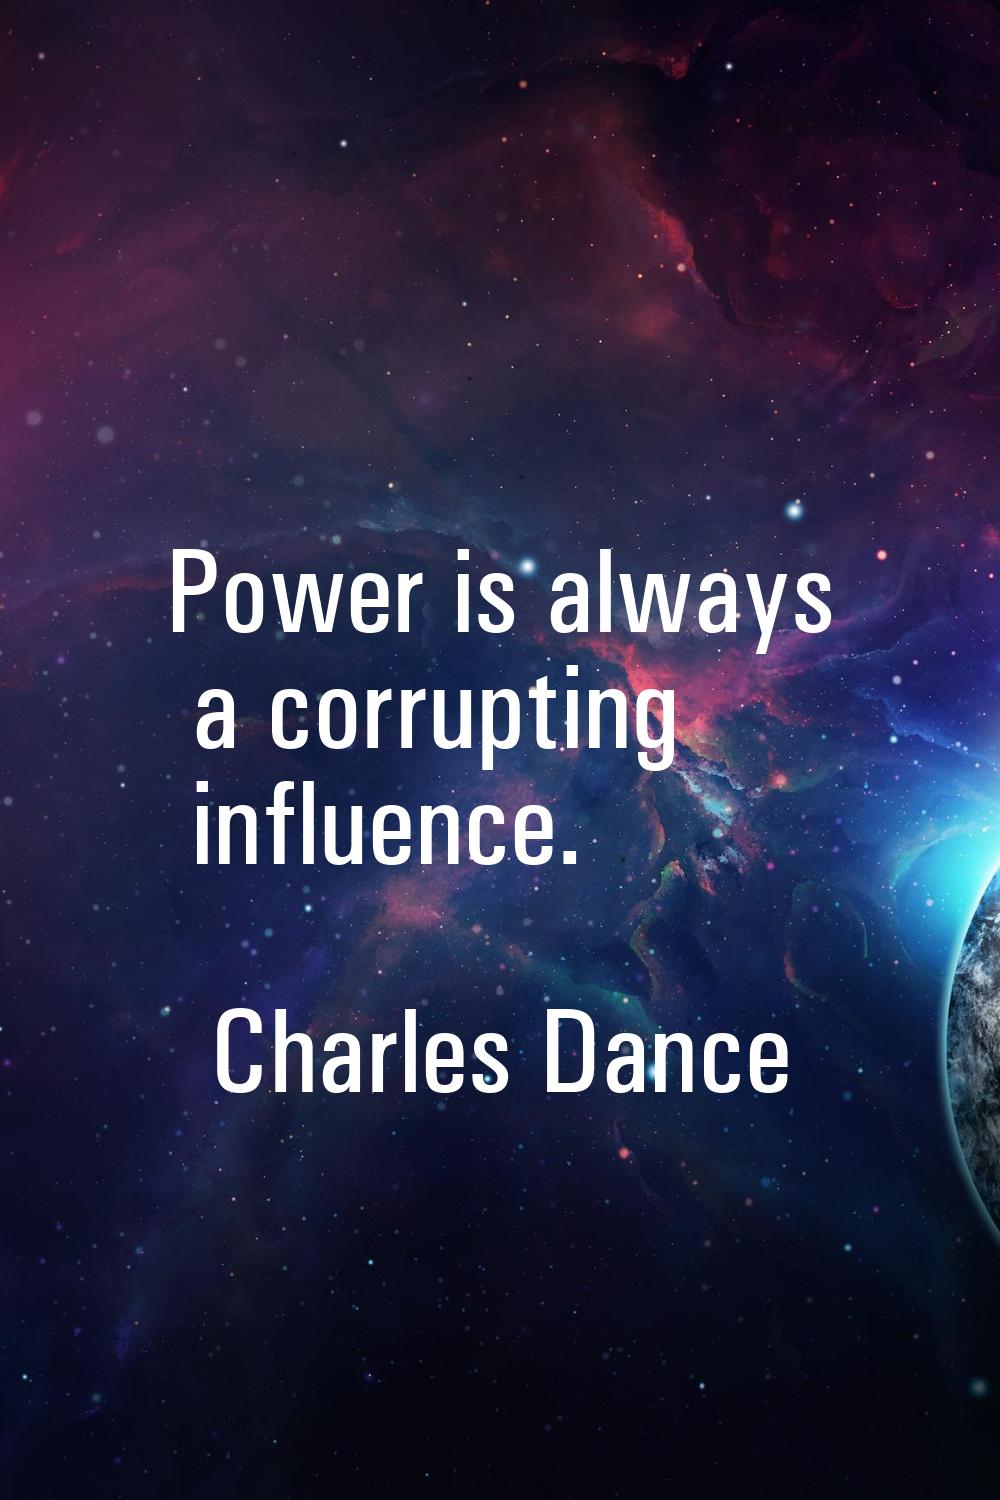 Power is always a corrupting influence.